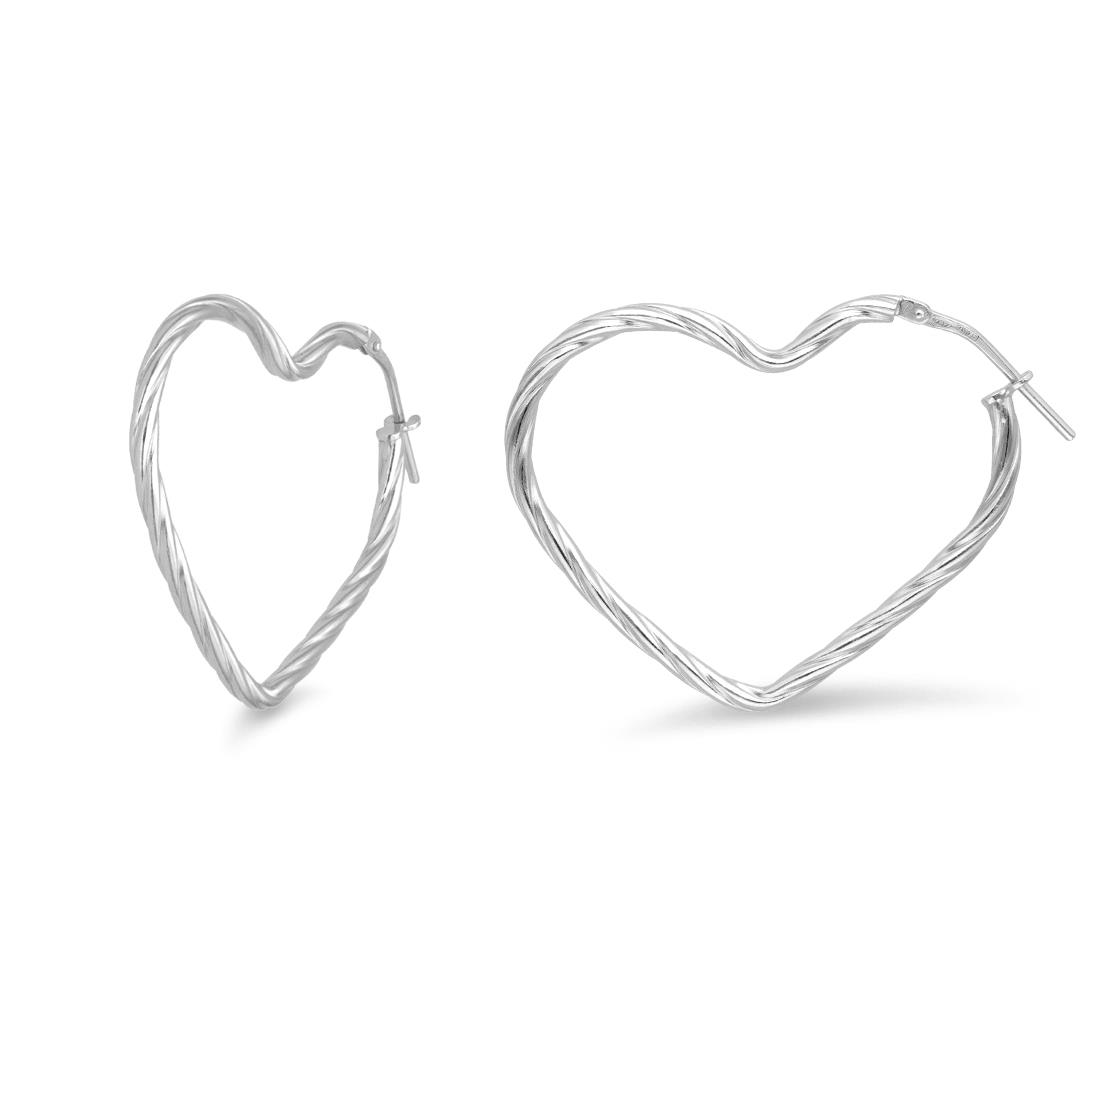 Hula Hoop collection heart-shaped torchon hoop earrings in rhodium-plated silver 925 - LUXURY MILANO